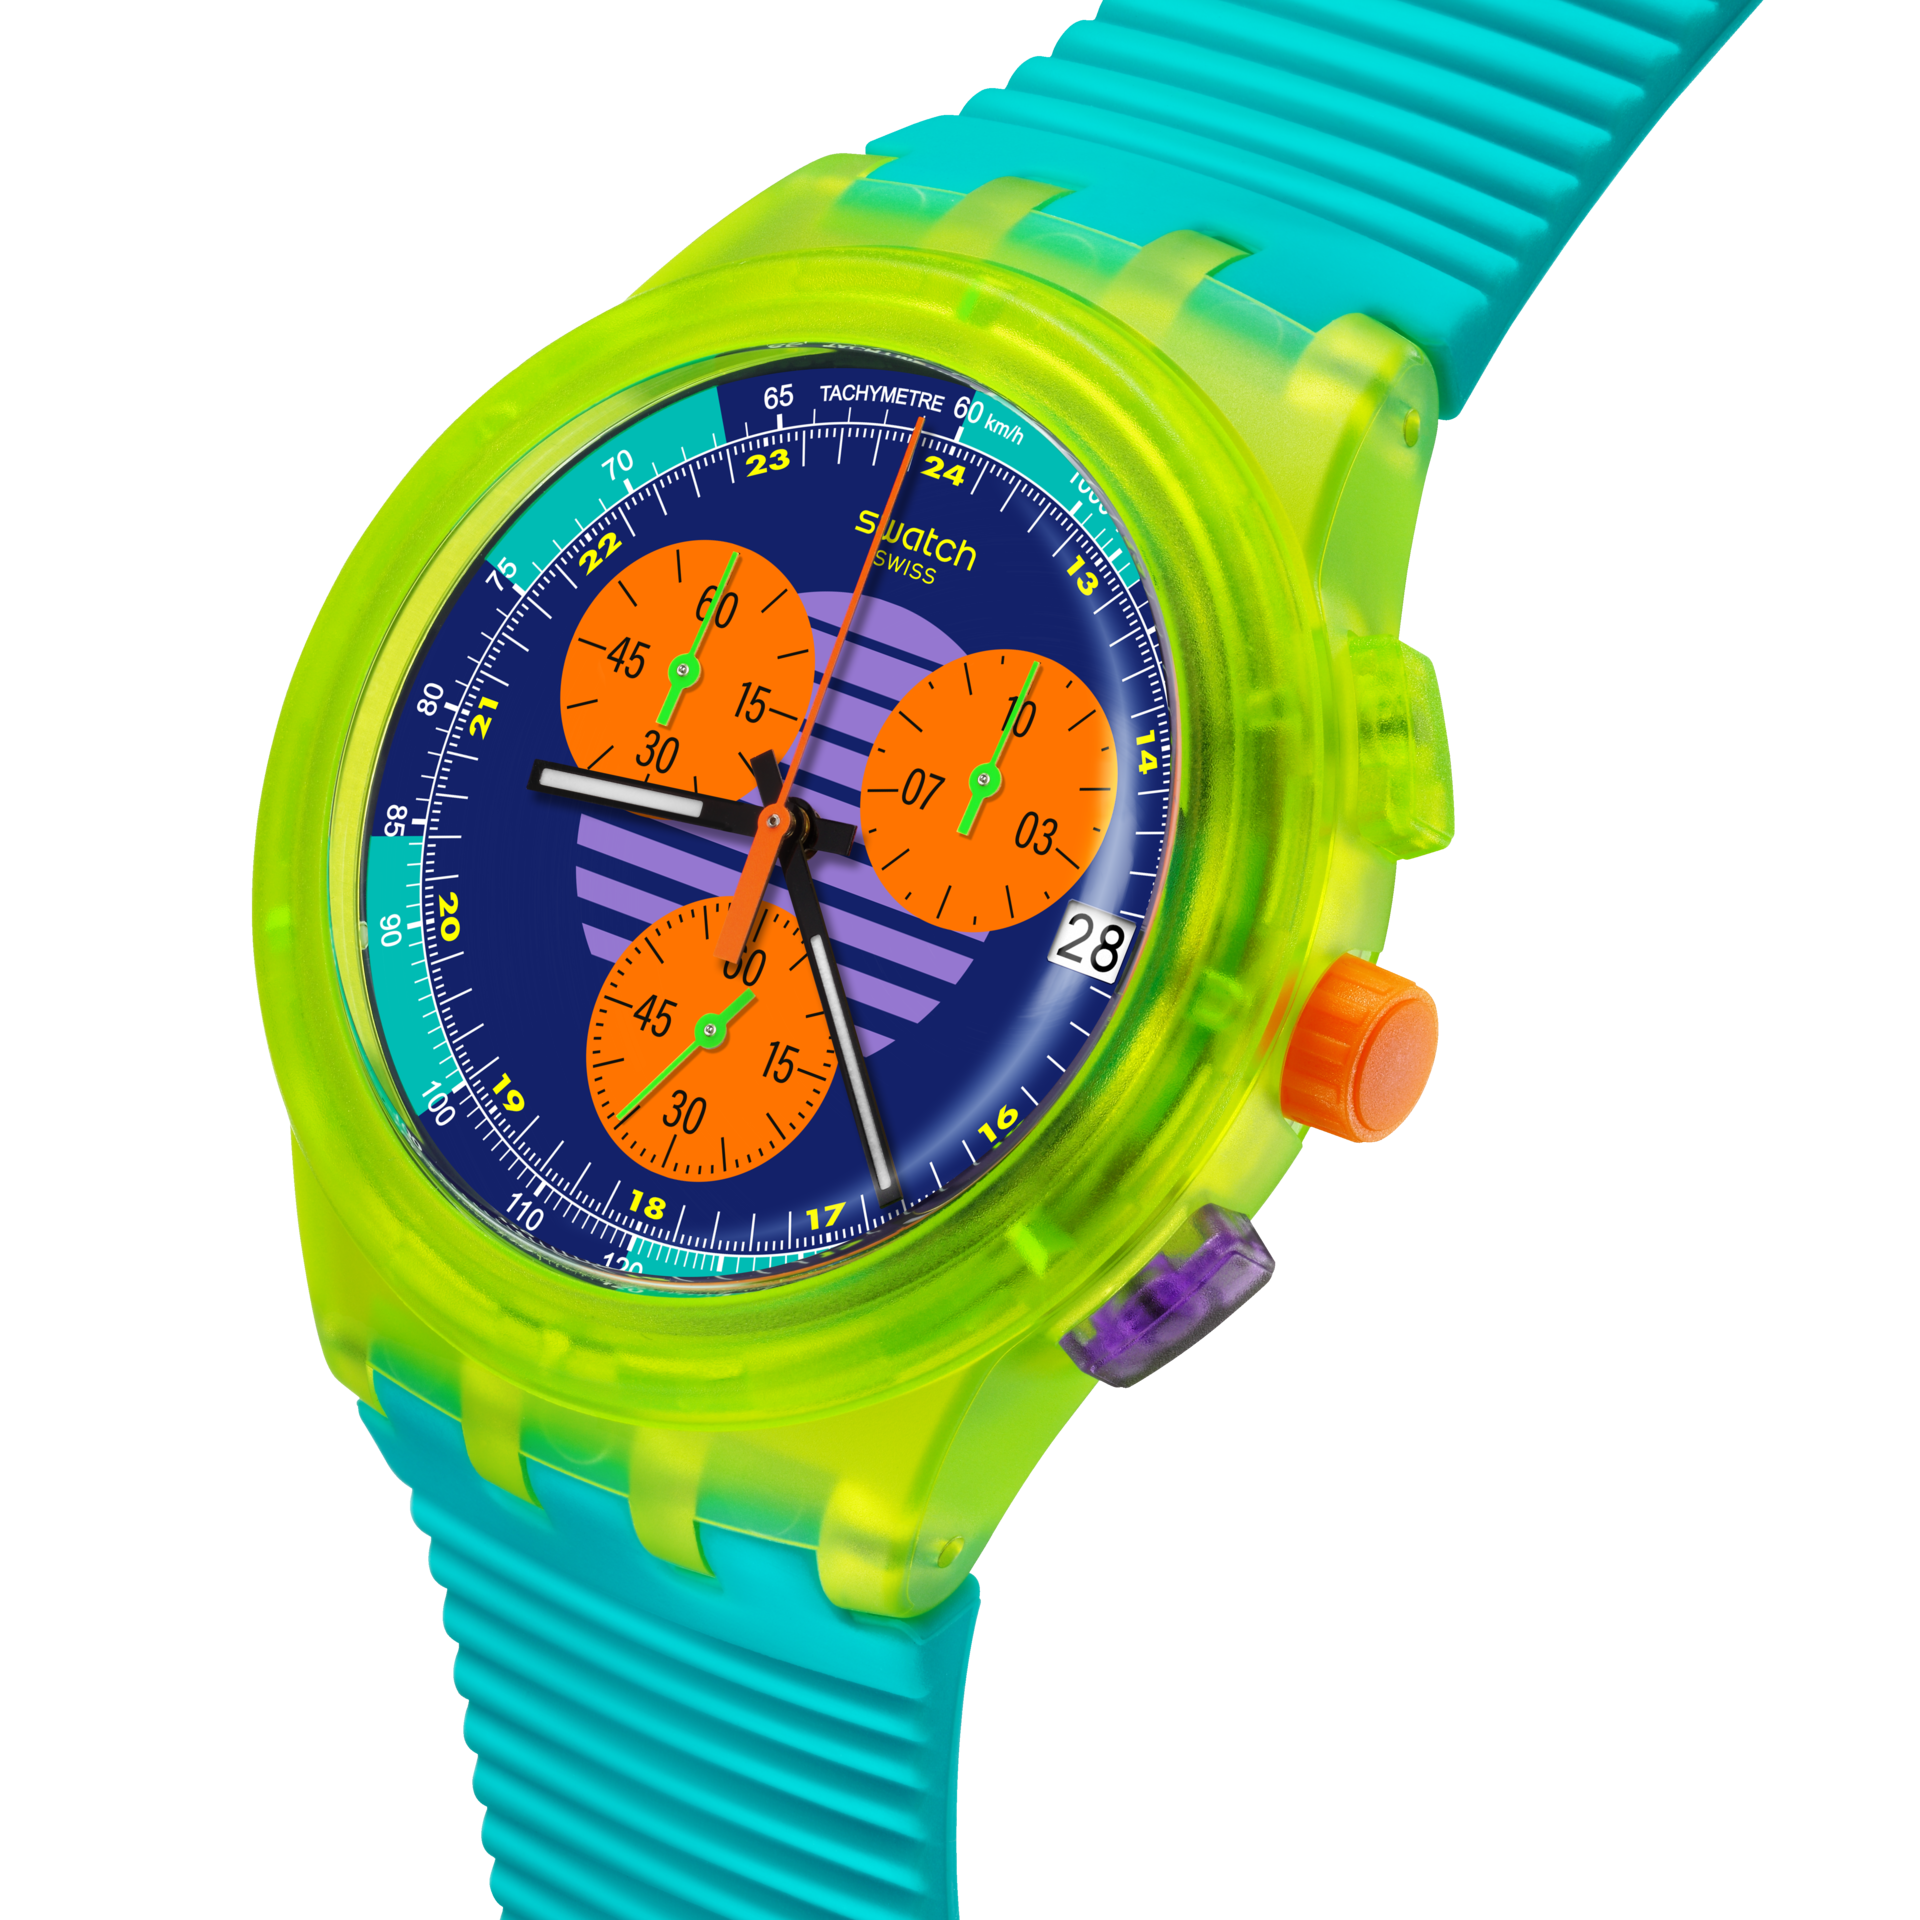 SWATCH NEON SWATCH NEON WAVE-2